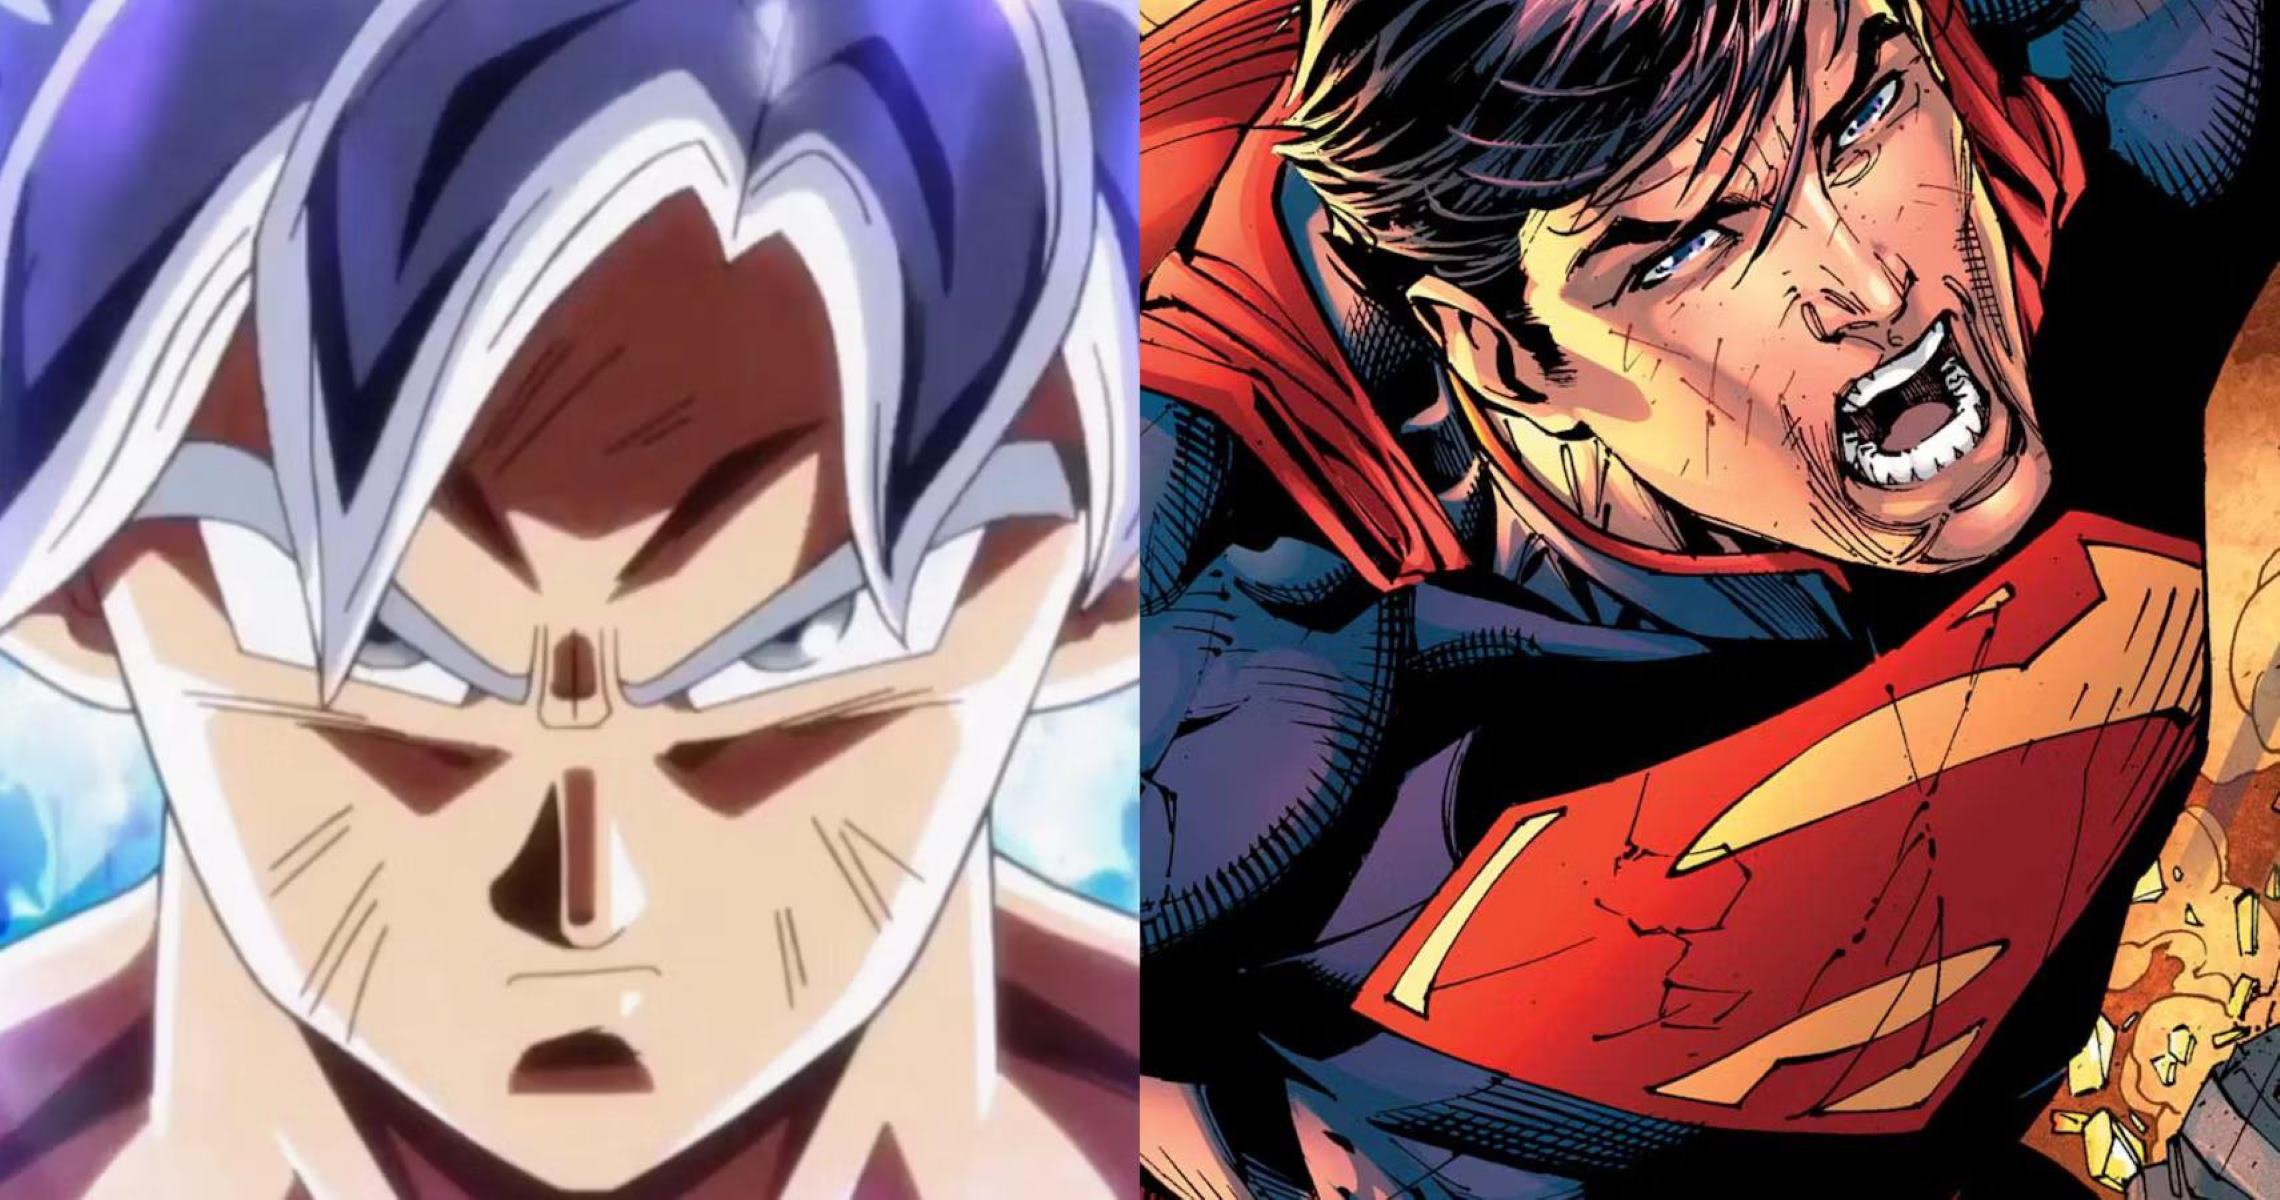 The Ultimate Showdown: Cosmic Armor Superman Vs Complete Ultra Instinct Goku - Who Will Emerge Victorious?